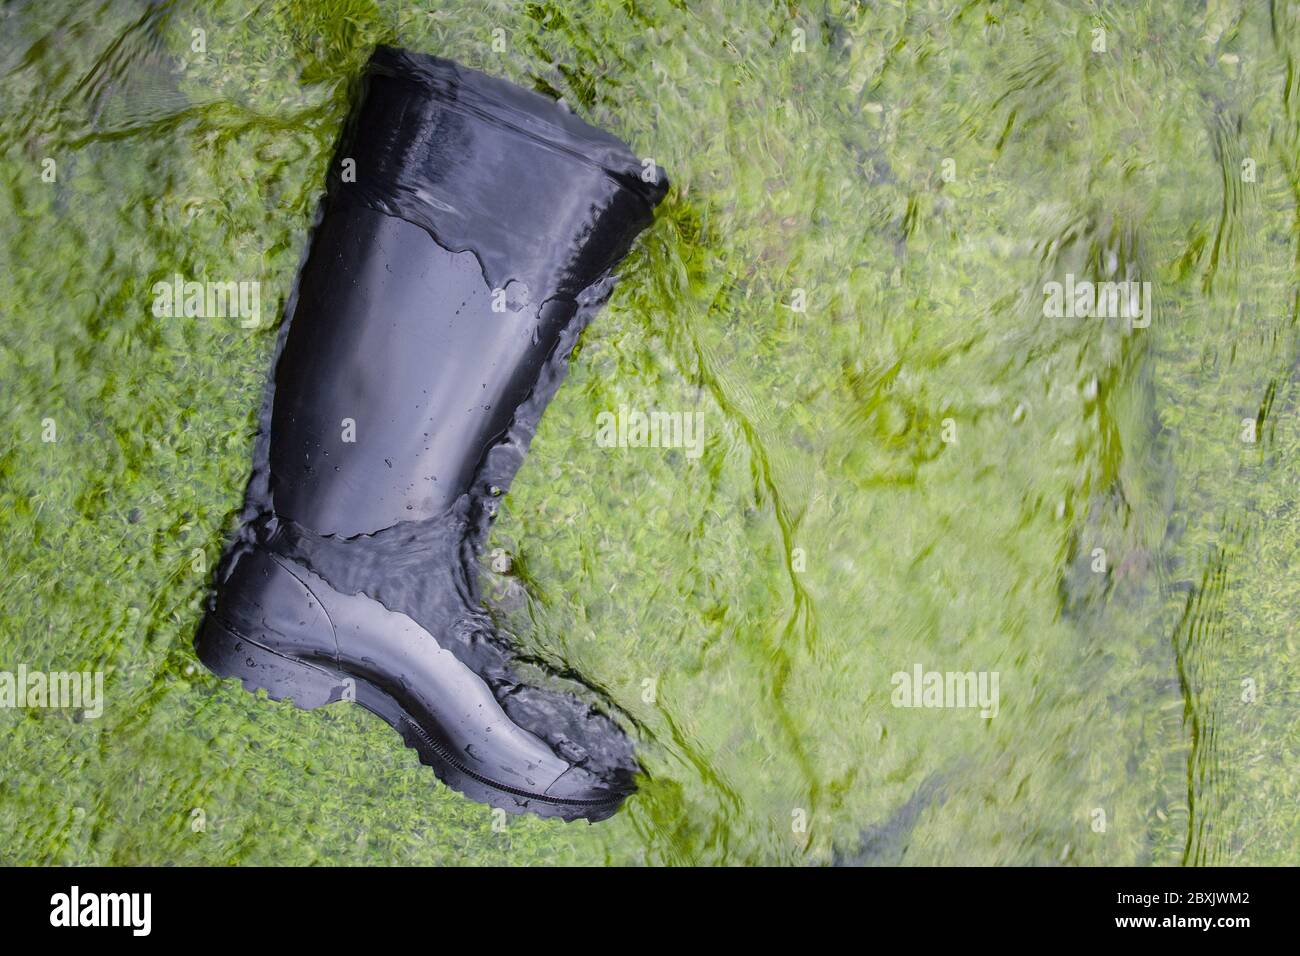 Black rubber boots lie in the stream on green moss. Stock Photo